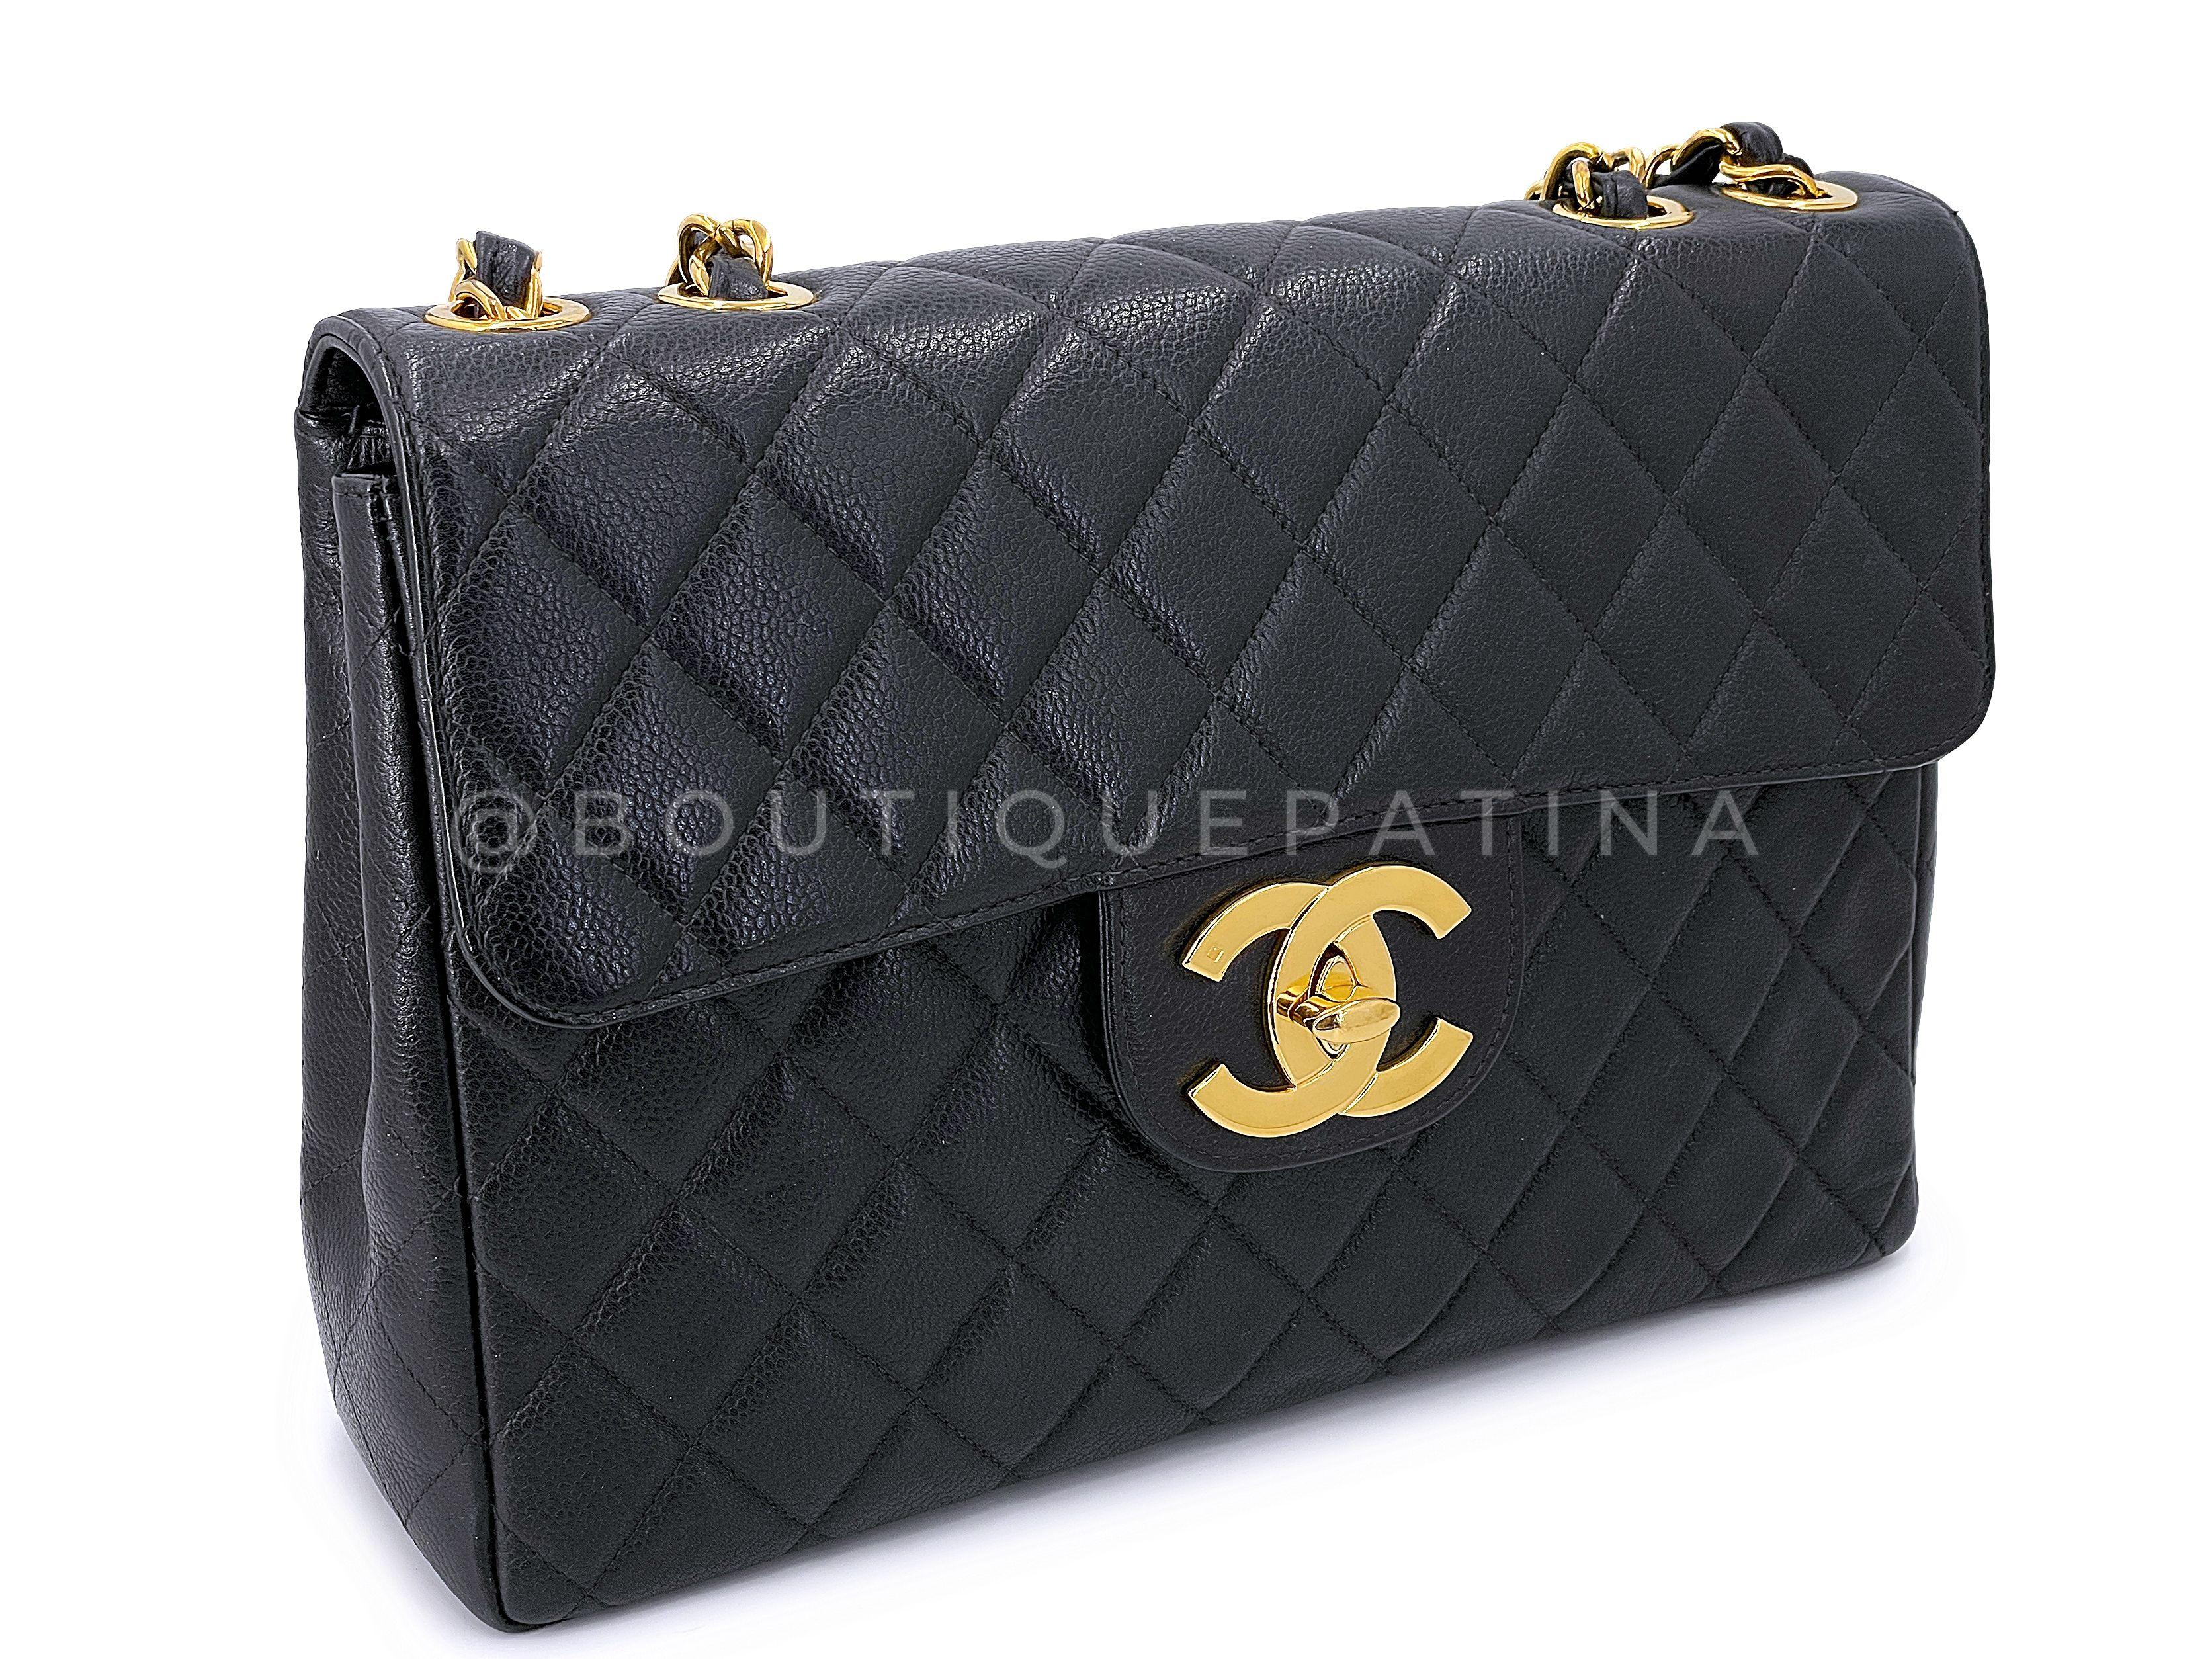 Chanel Vintage 1997 Black Caviar Jumbo Classic Flap Bag 24k GHW 67441 In Excellent Condition For Sale In Costa Mesa, CA